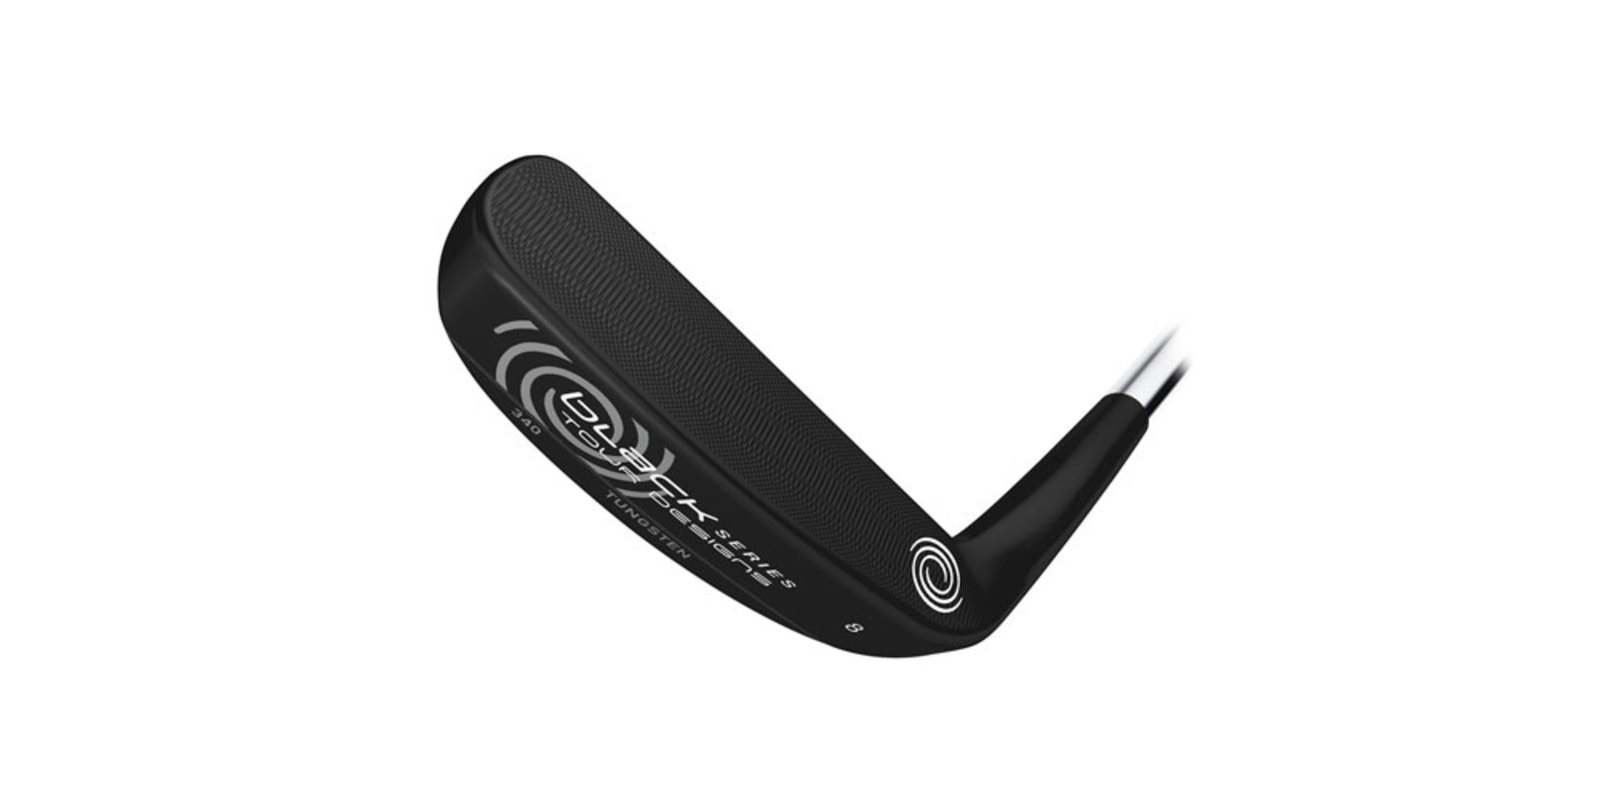 Odyssey Black Series Tour Designs 8 Putter Review